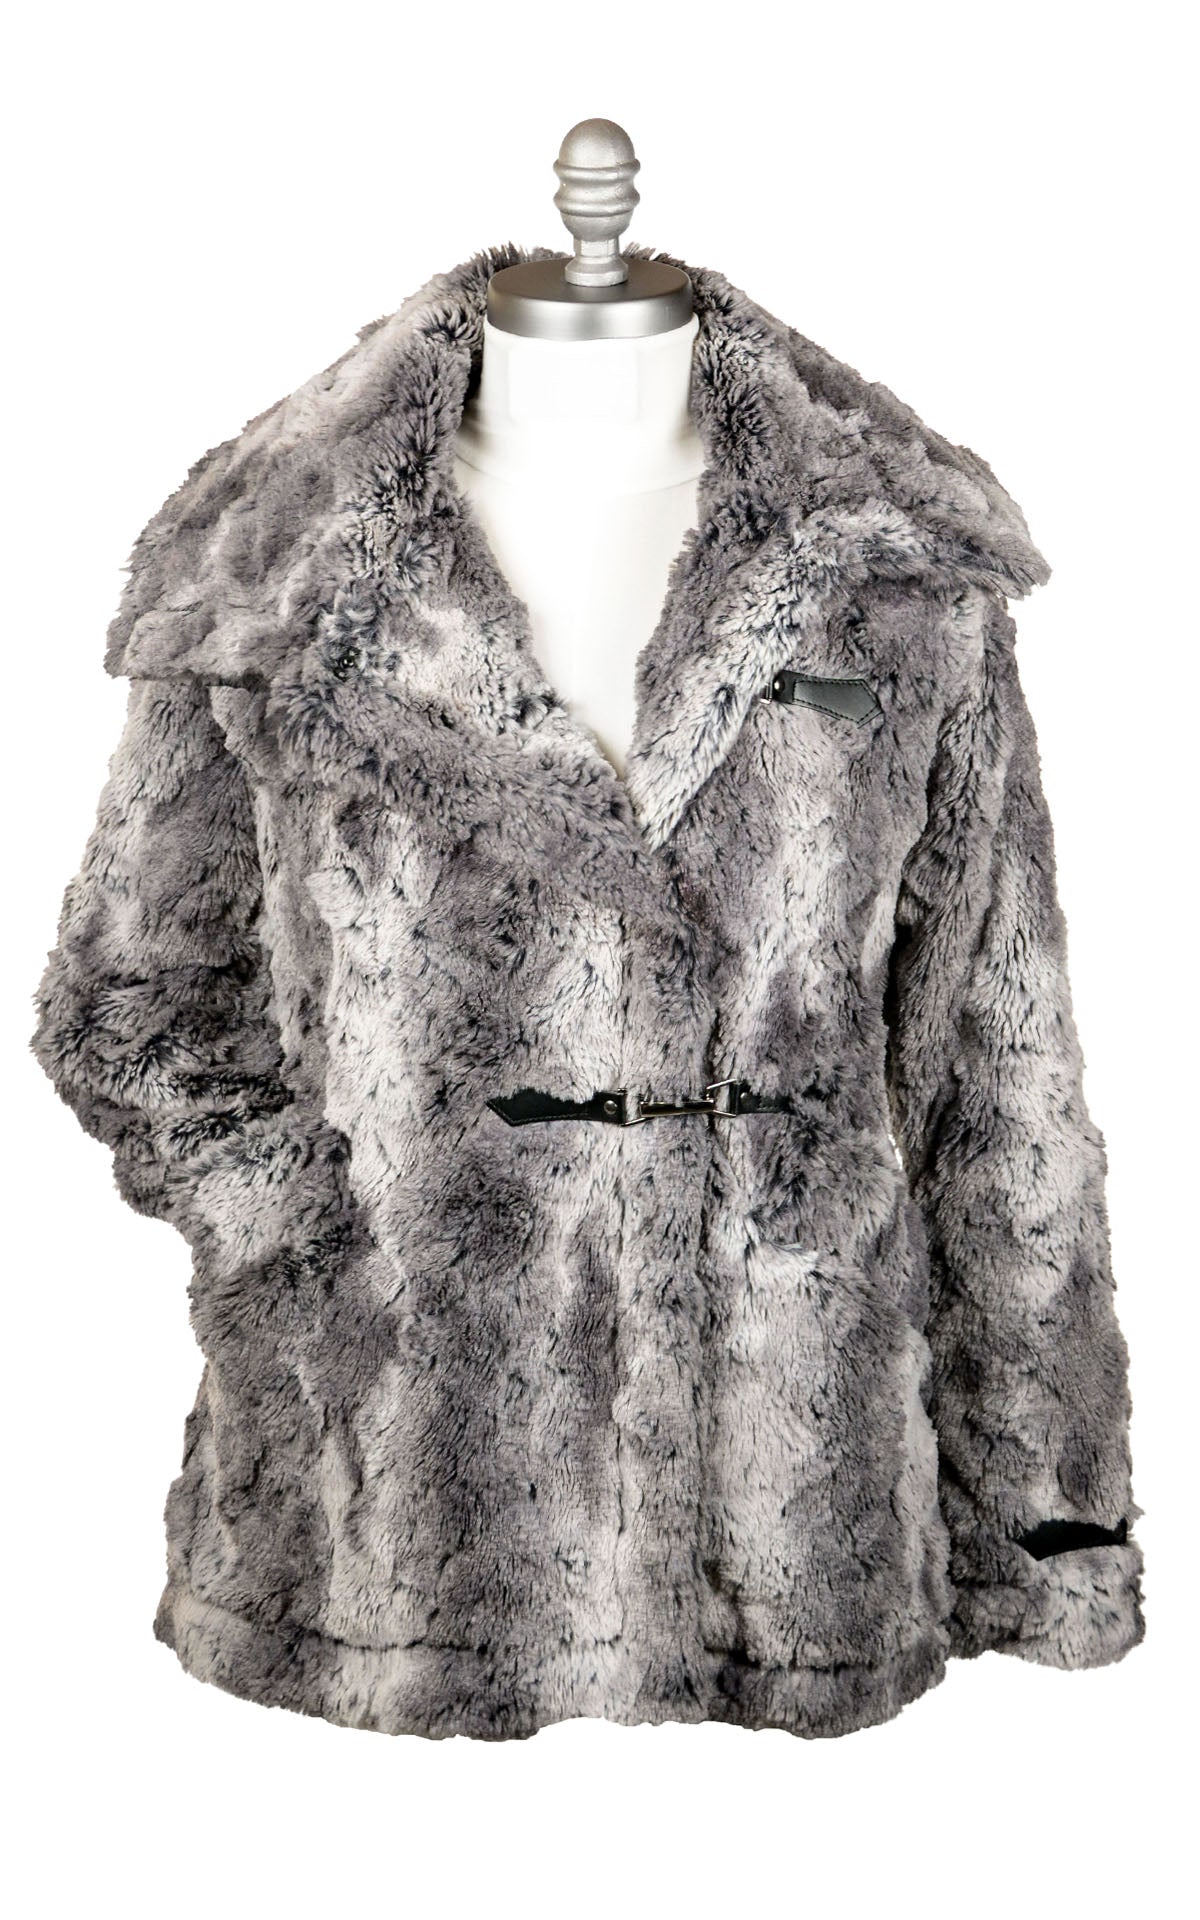 Front View of a partially open Dietrich Coat in Luxury Faux Fur in Seattle Sky by Pandemonium Seattle. Handmade in Seattle, WA USA.